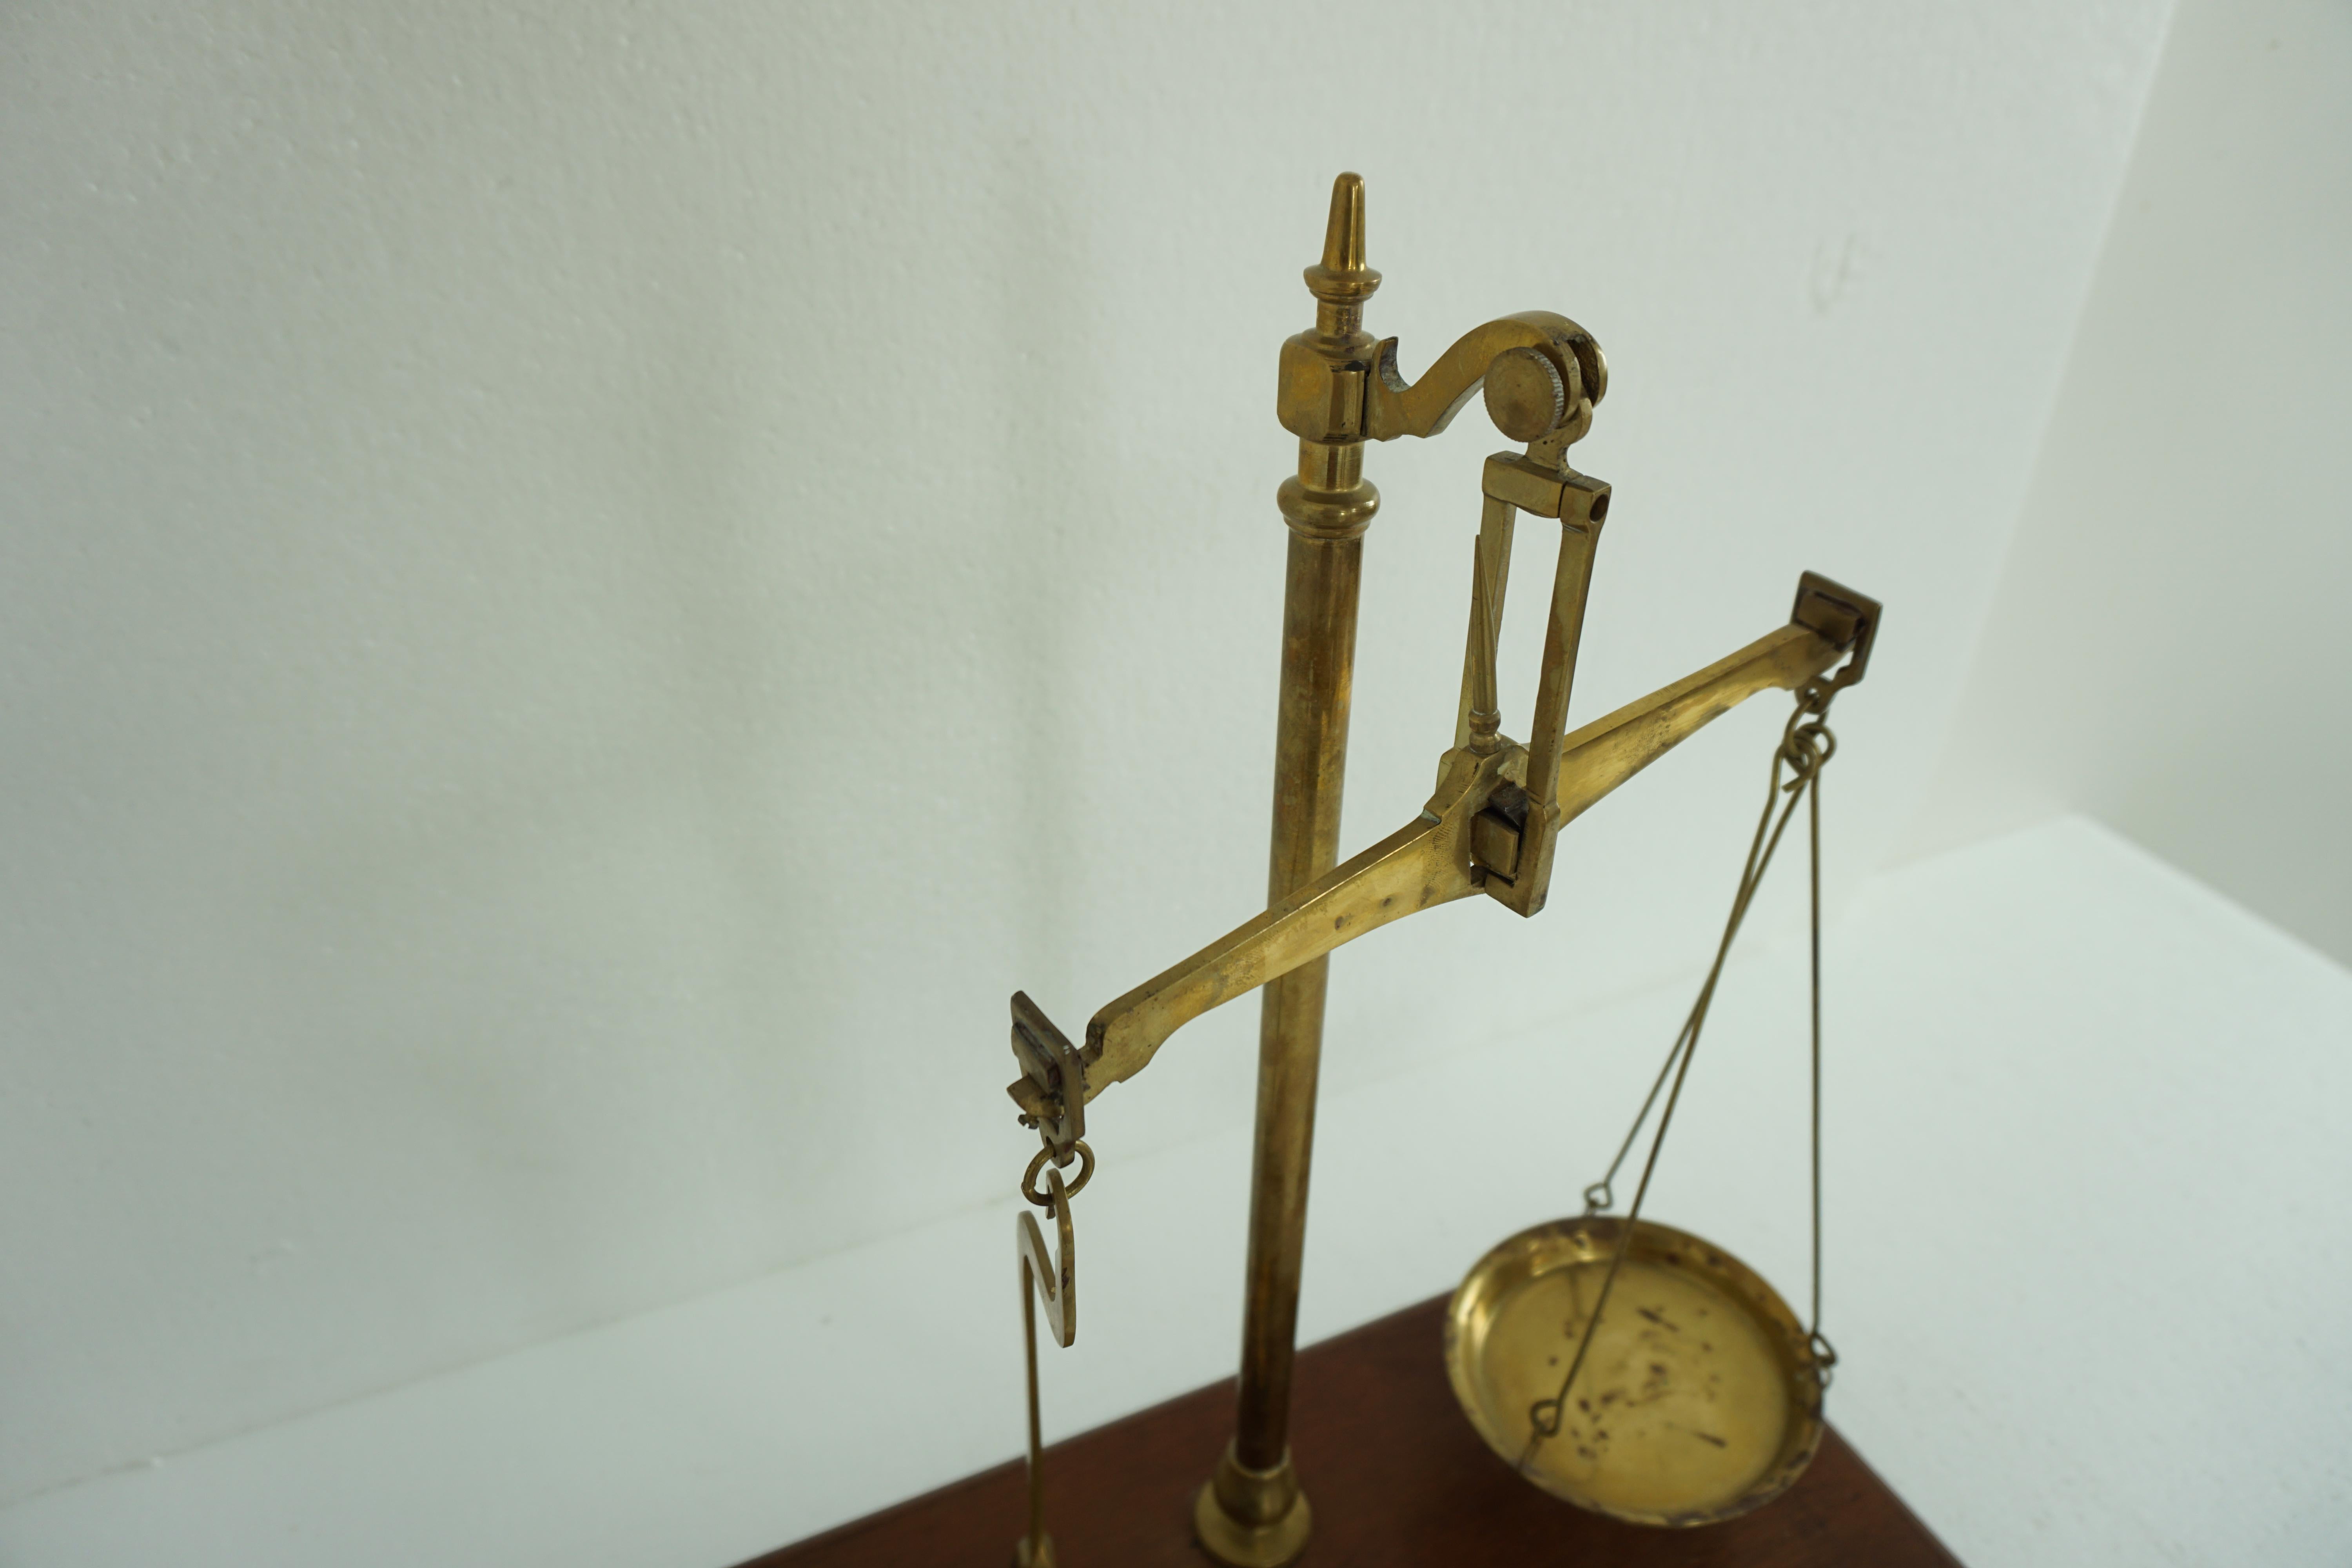 Vintage set of brass grocer's dairy scales, Scotland, 1930s, 1967

Scotland,

1930s

All original
Standing on a moulded walnut base
Beam balance scale
All made of solid brass
With a brass produce pan to the left
And another brass holder to the